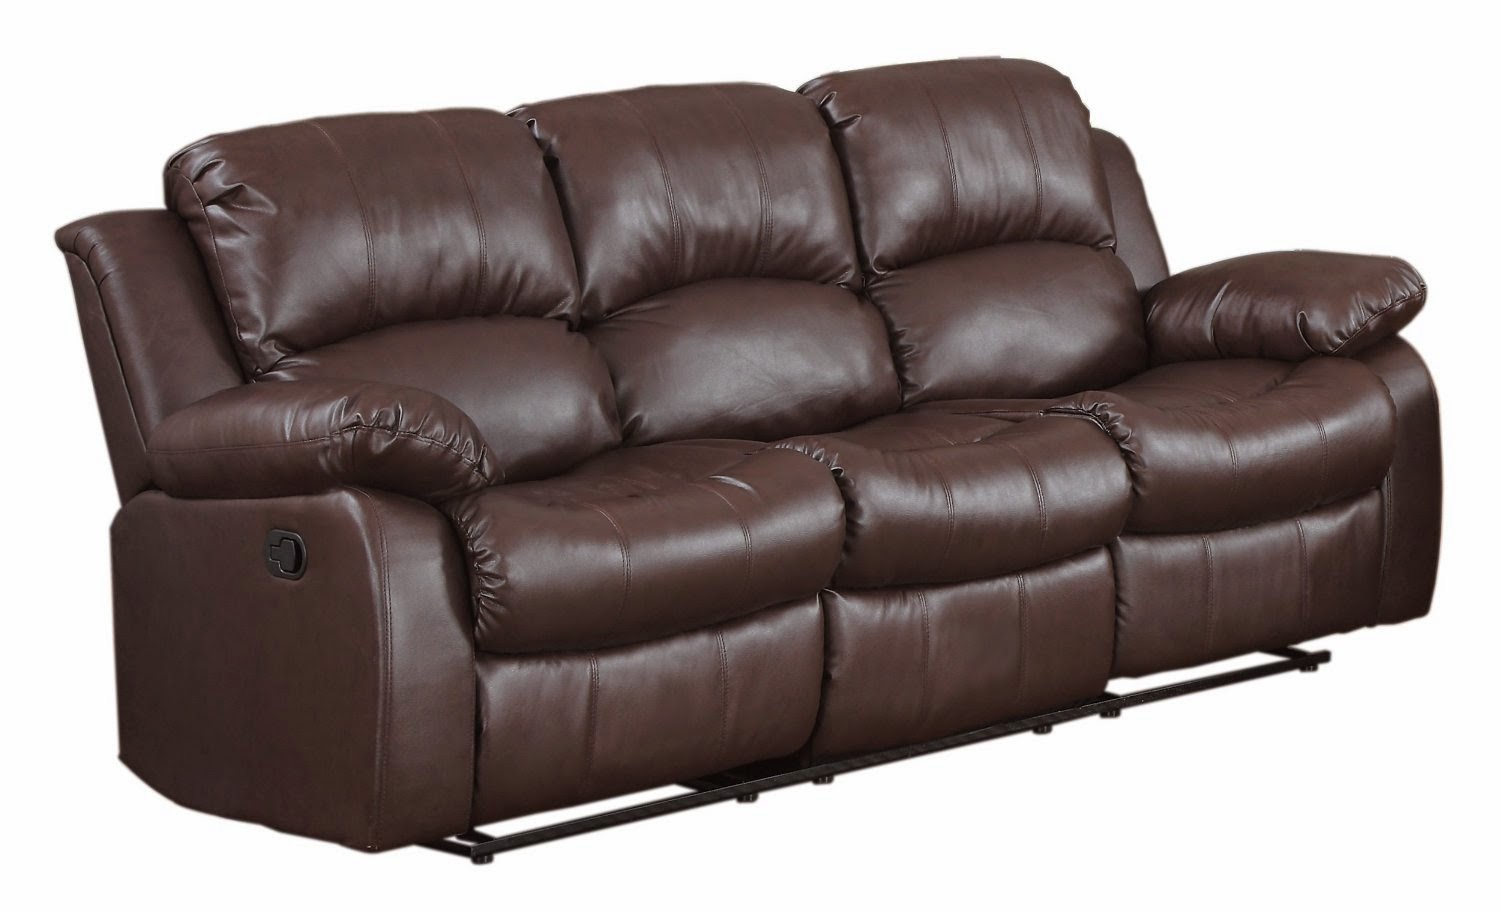 leather sectional sofa chaise recliner photo - 5